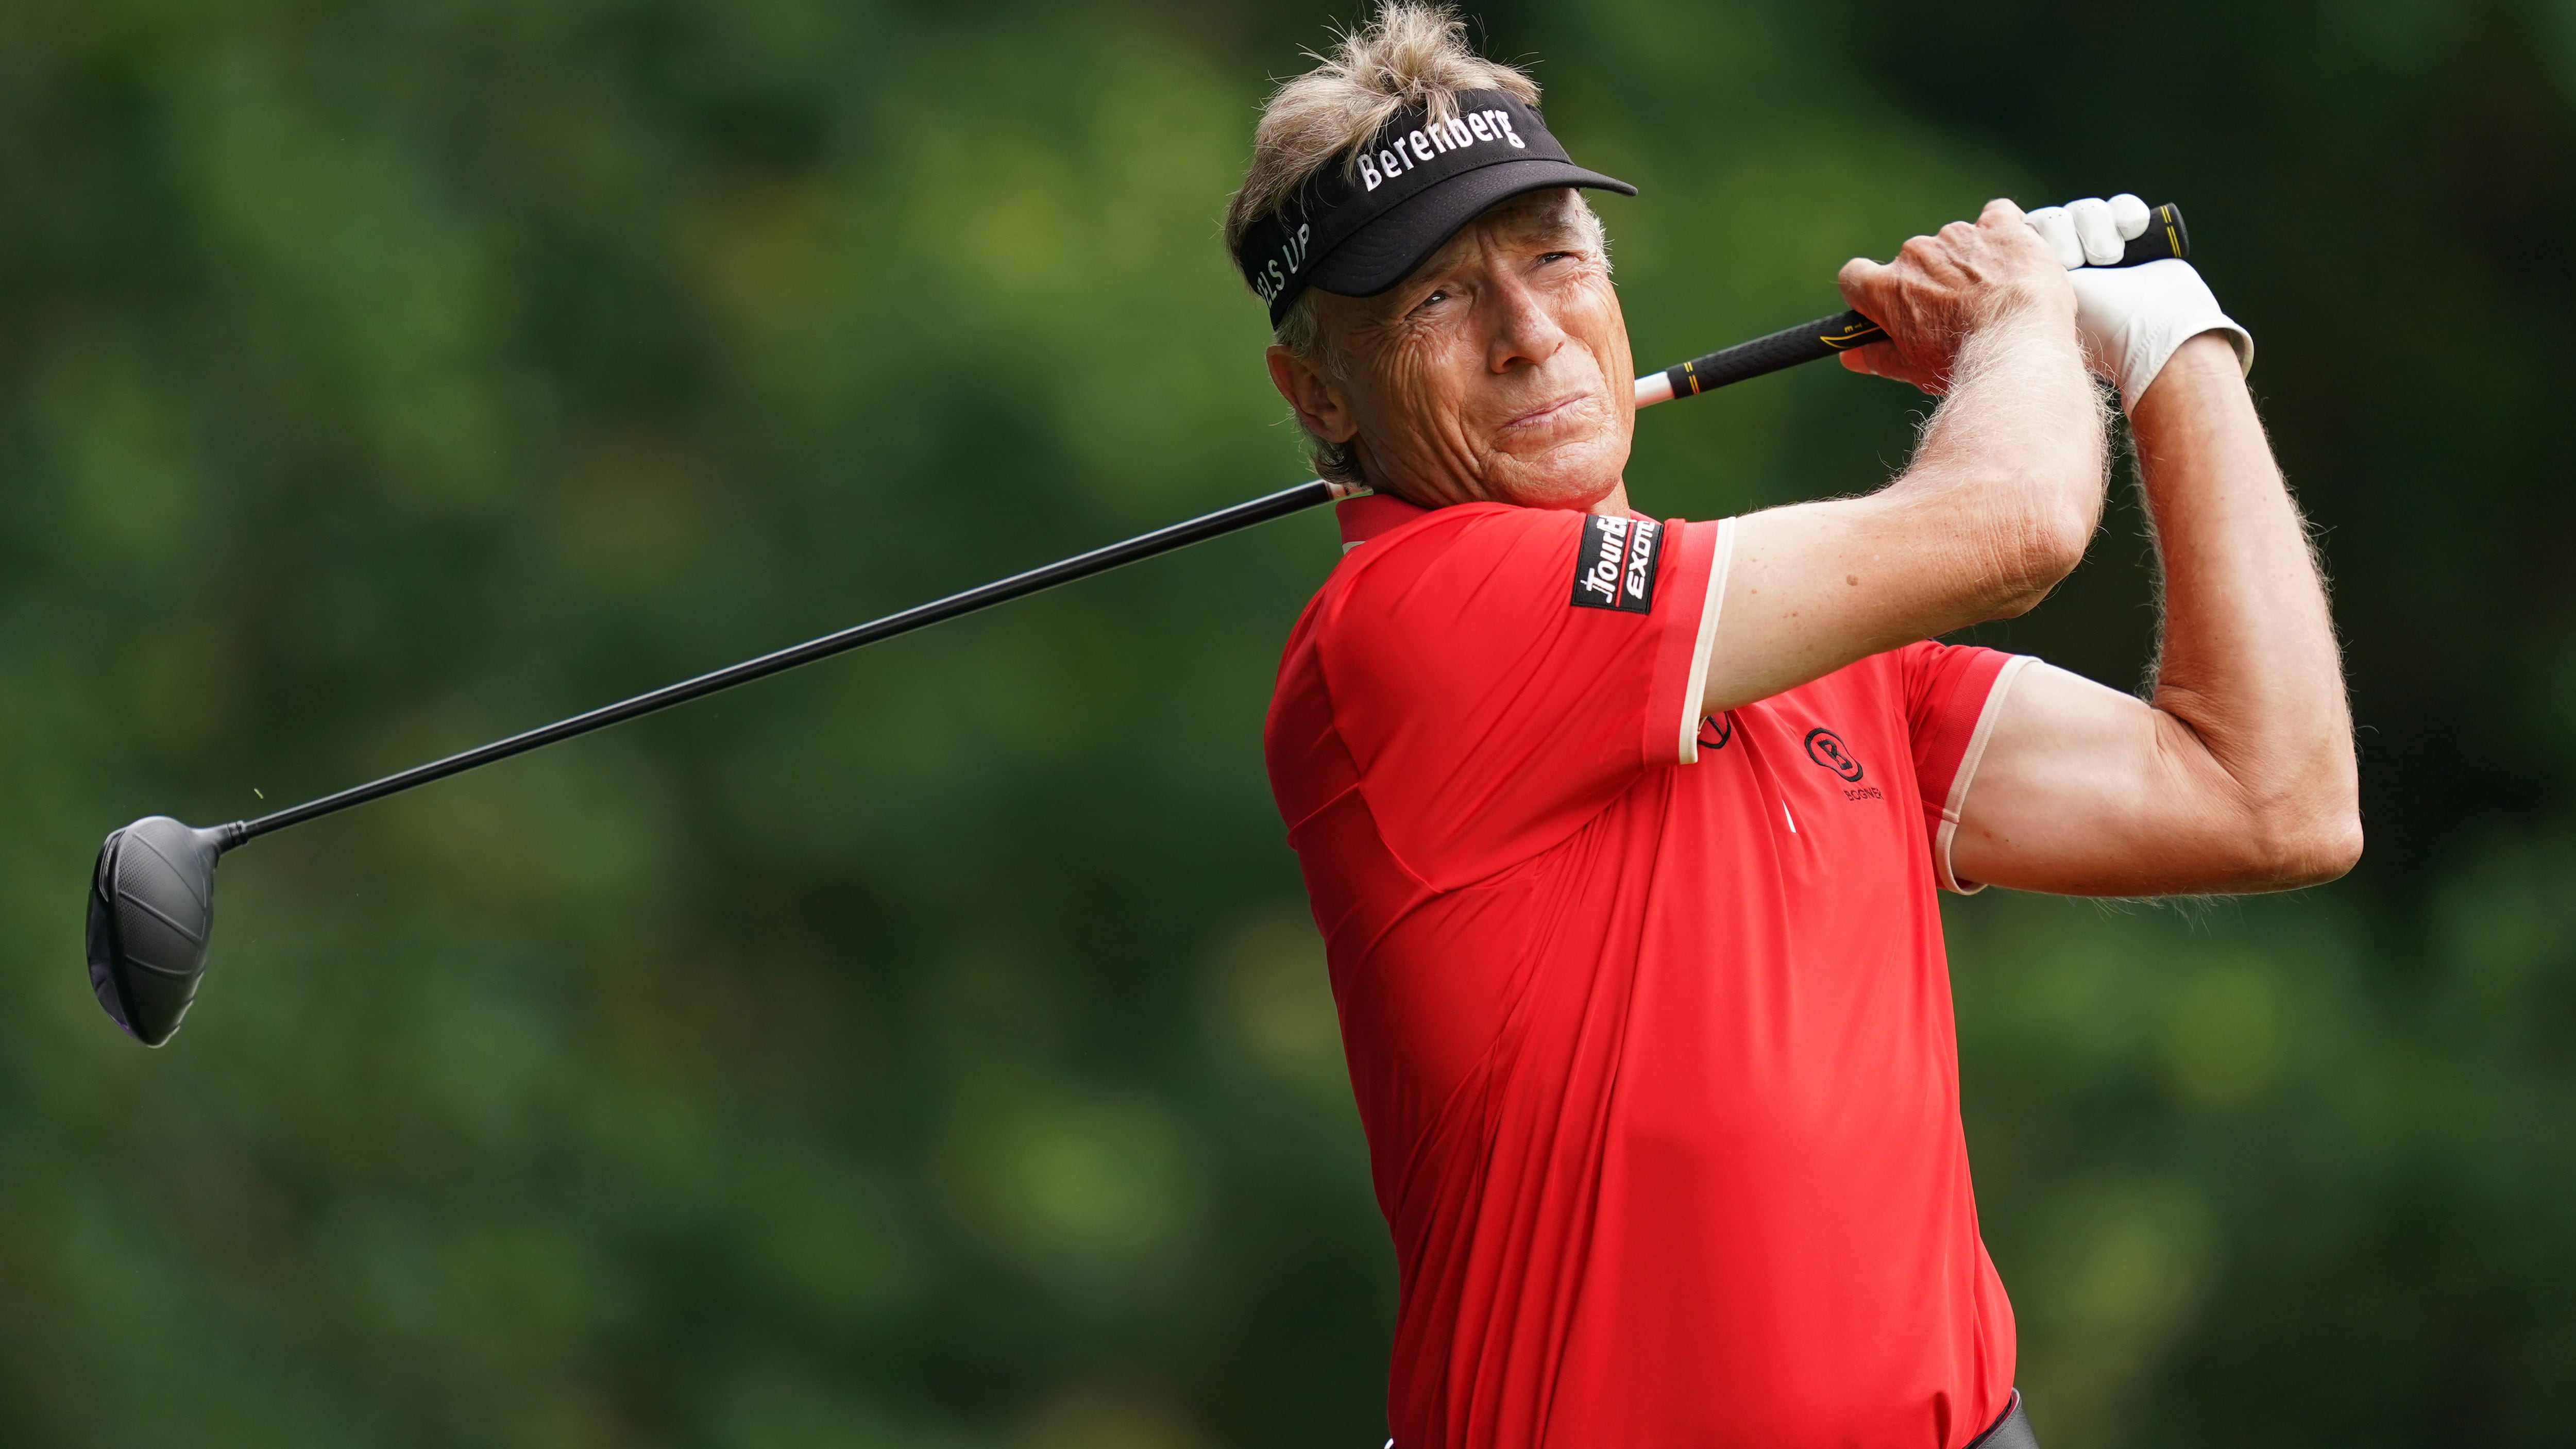 Bernhard Langer will make his final DP World Tour appearance in Germany this week